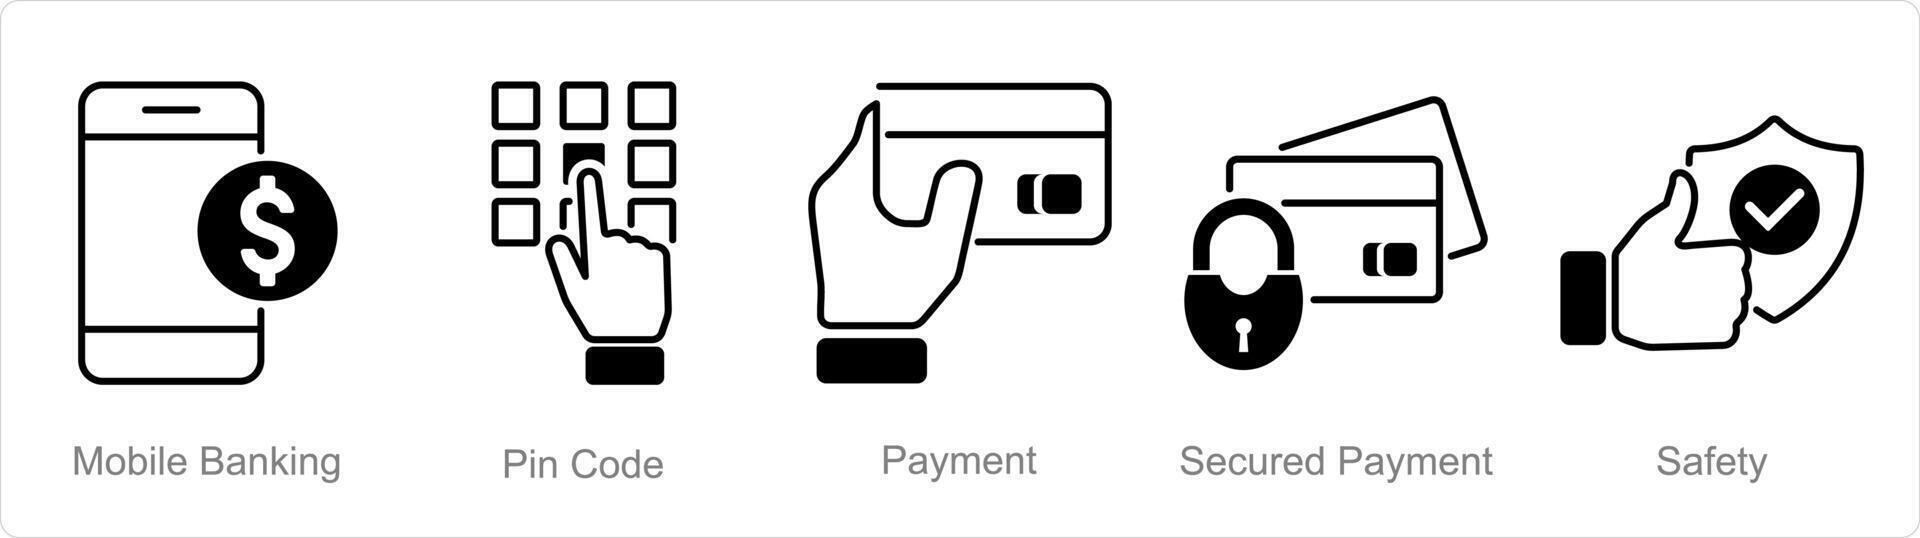 A set of 5 security icons as mobile banking, pin code, payment vector